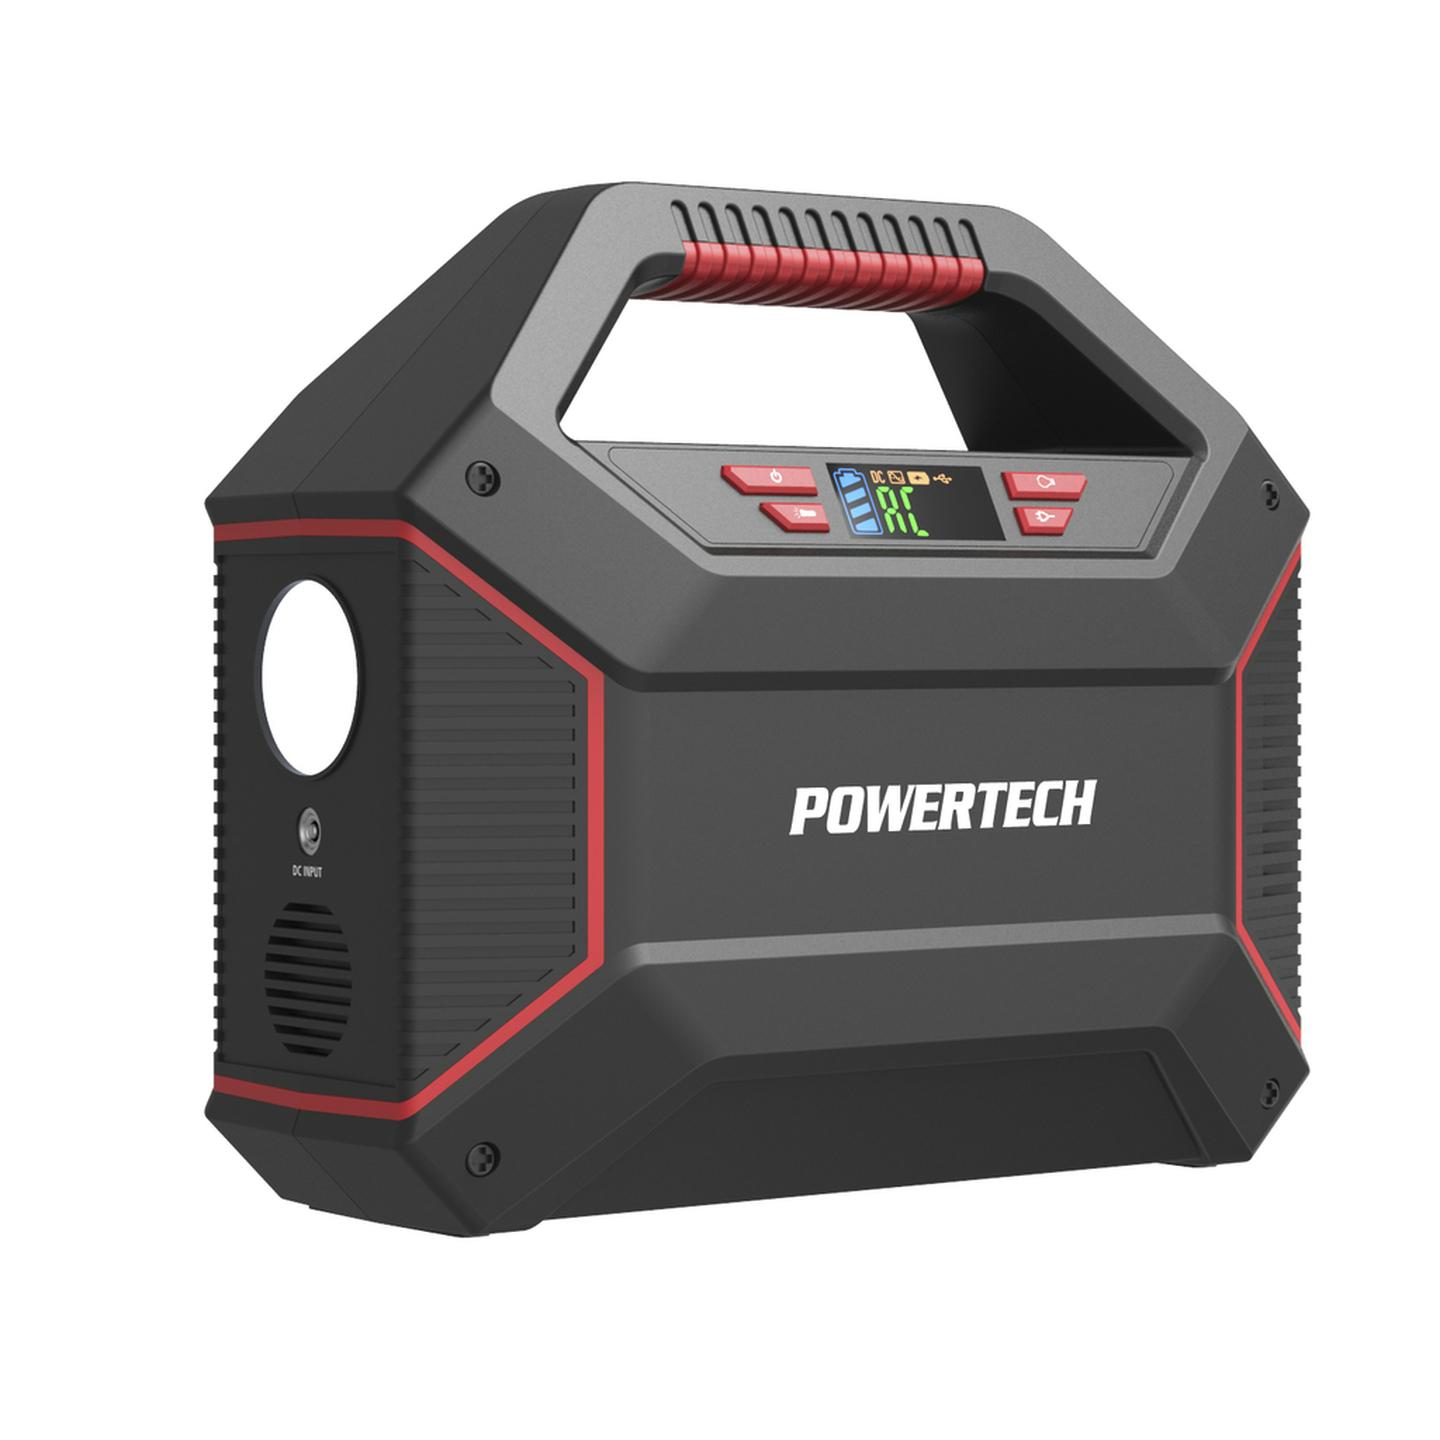 Powertech Portable 155W Power Centre with 100W Inverter and Digital Display